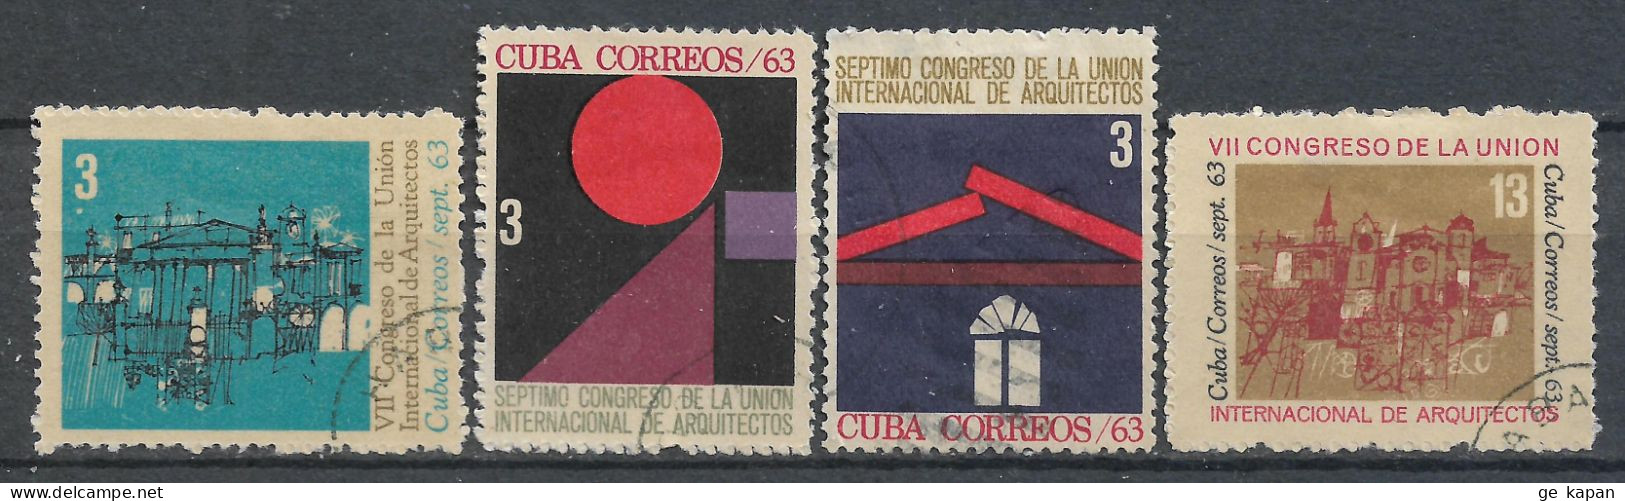 1963 CUBA SET OF 4 USED STAMPS (Michel # 864,865,867,870) CV €1.60 - Gebraucht